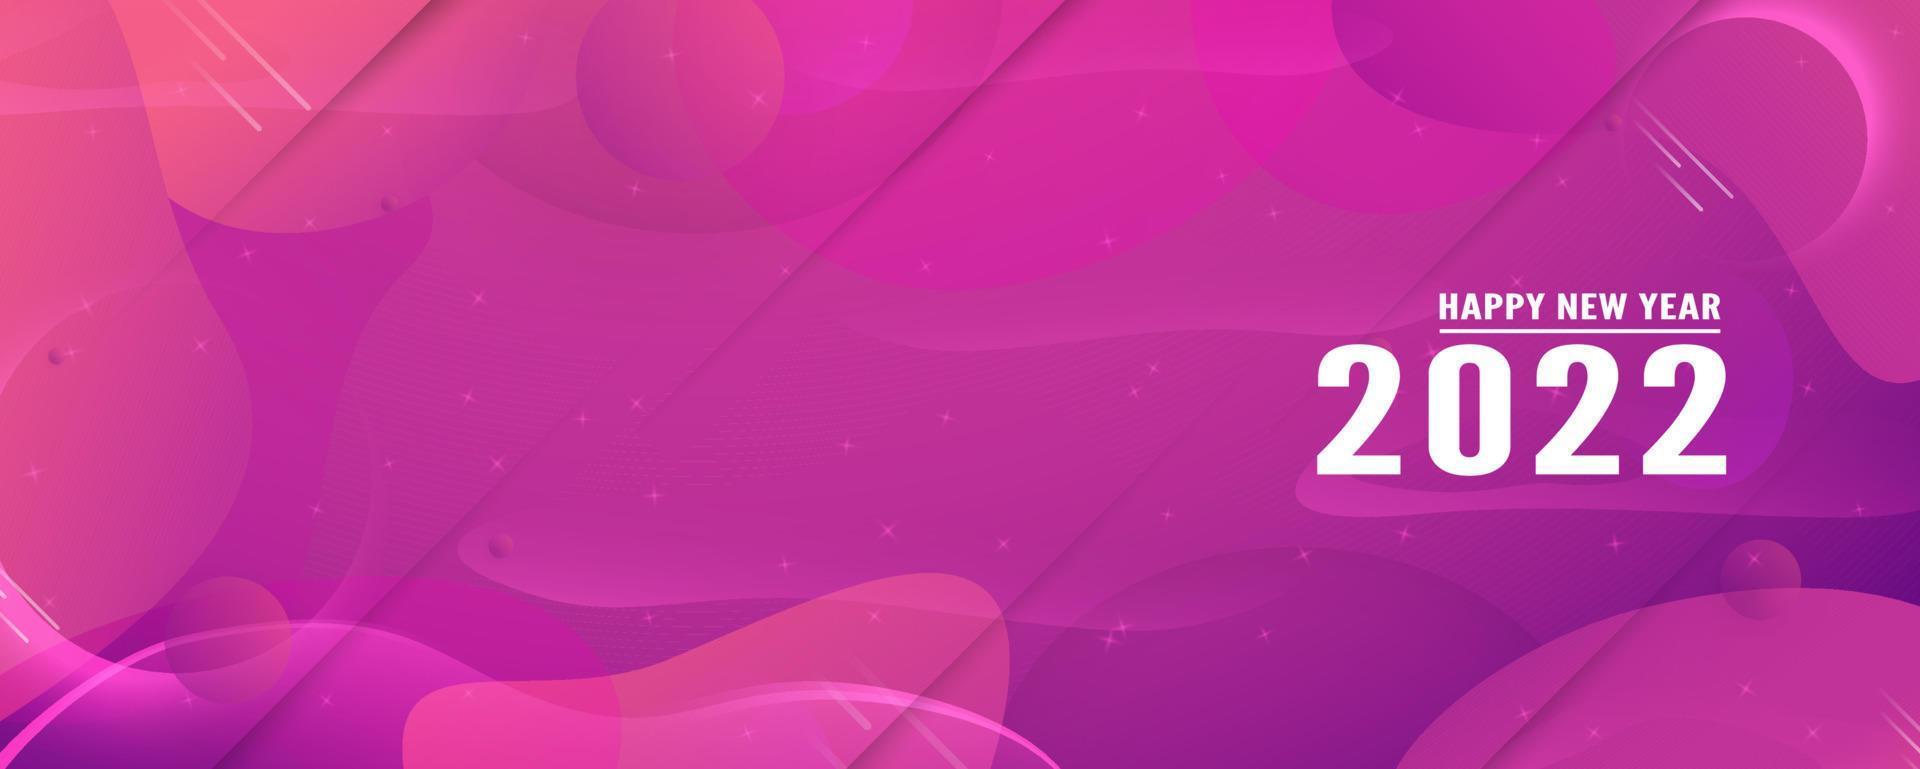 Happy new year 2022, Modern abstract background in liquid and fluid style. Purple paper cut. vector